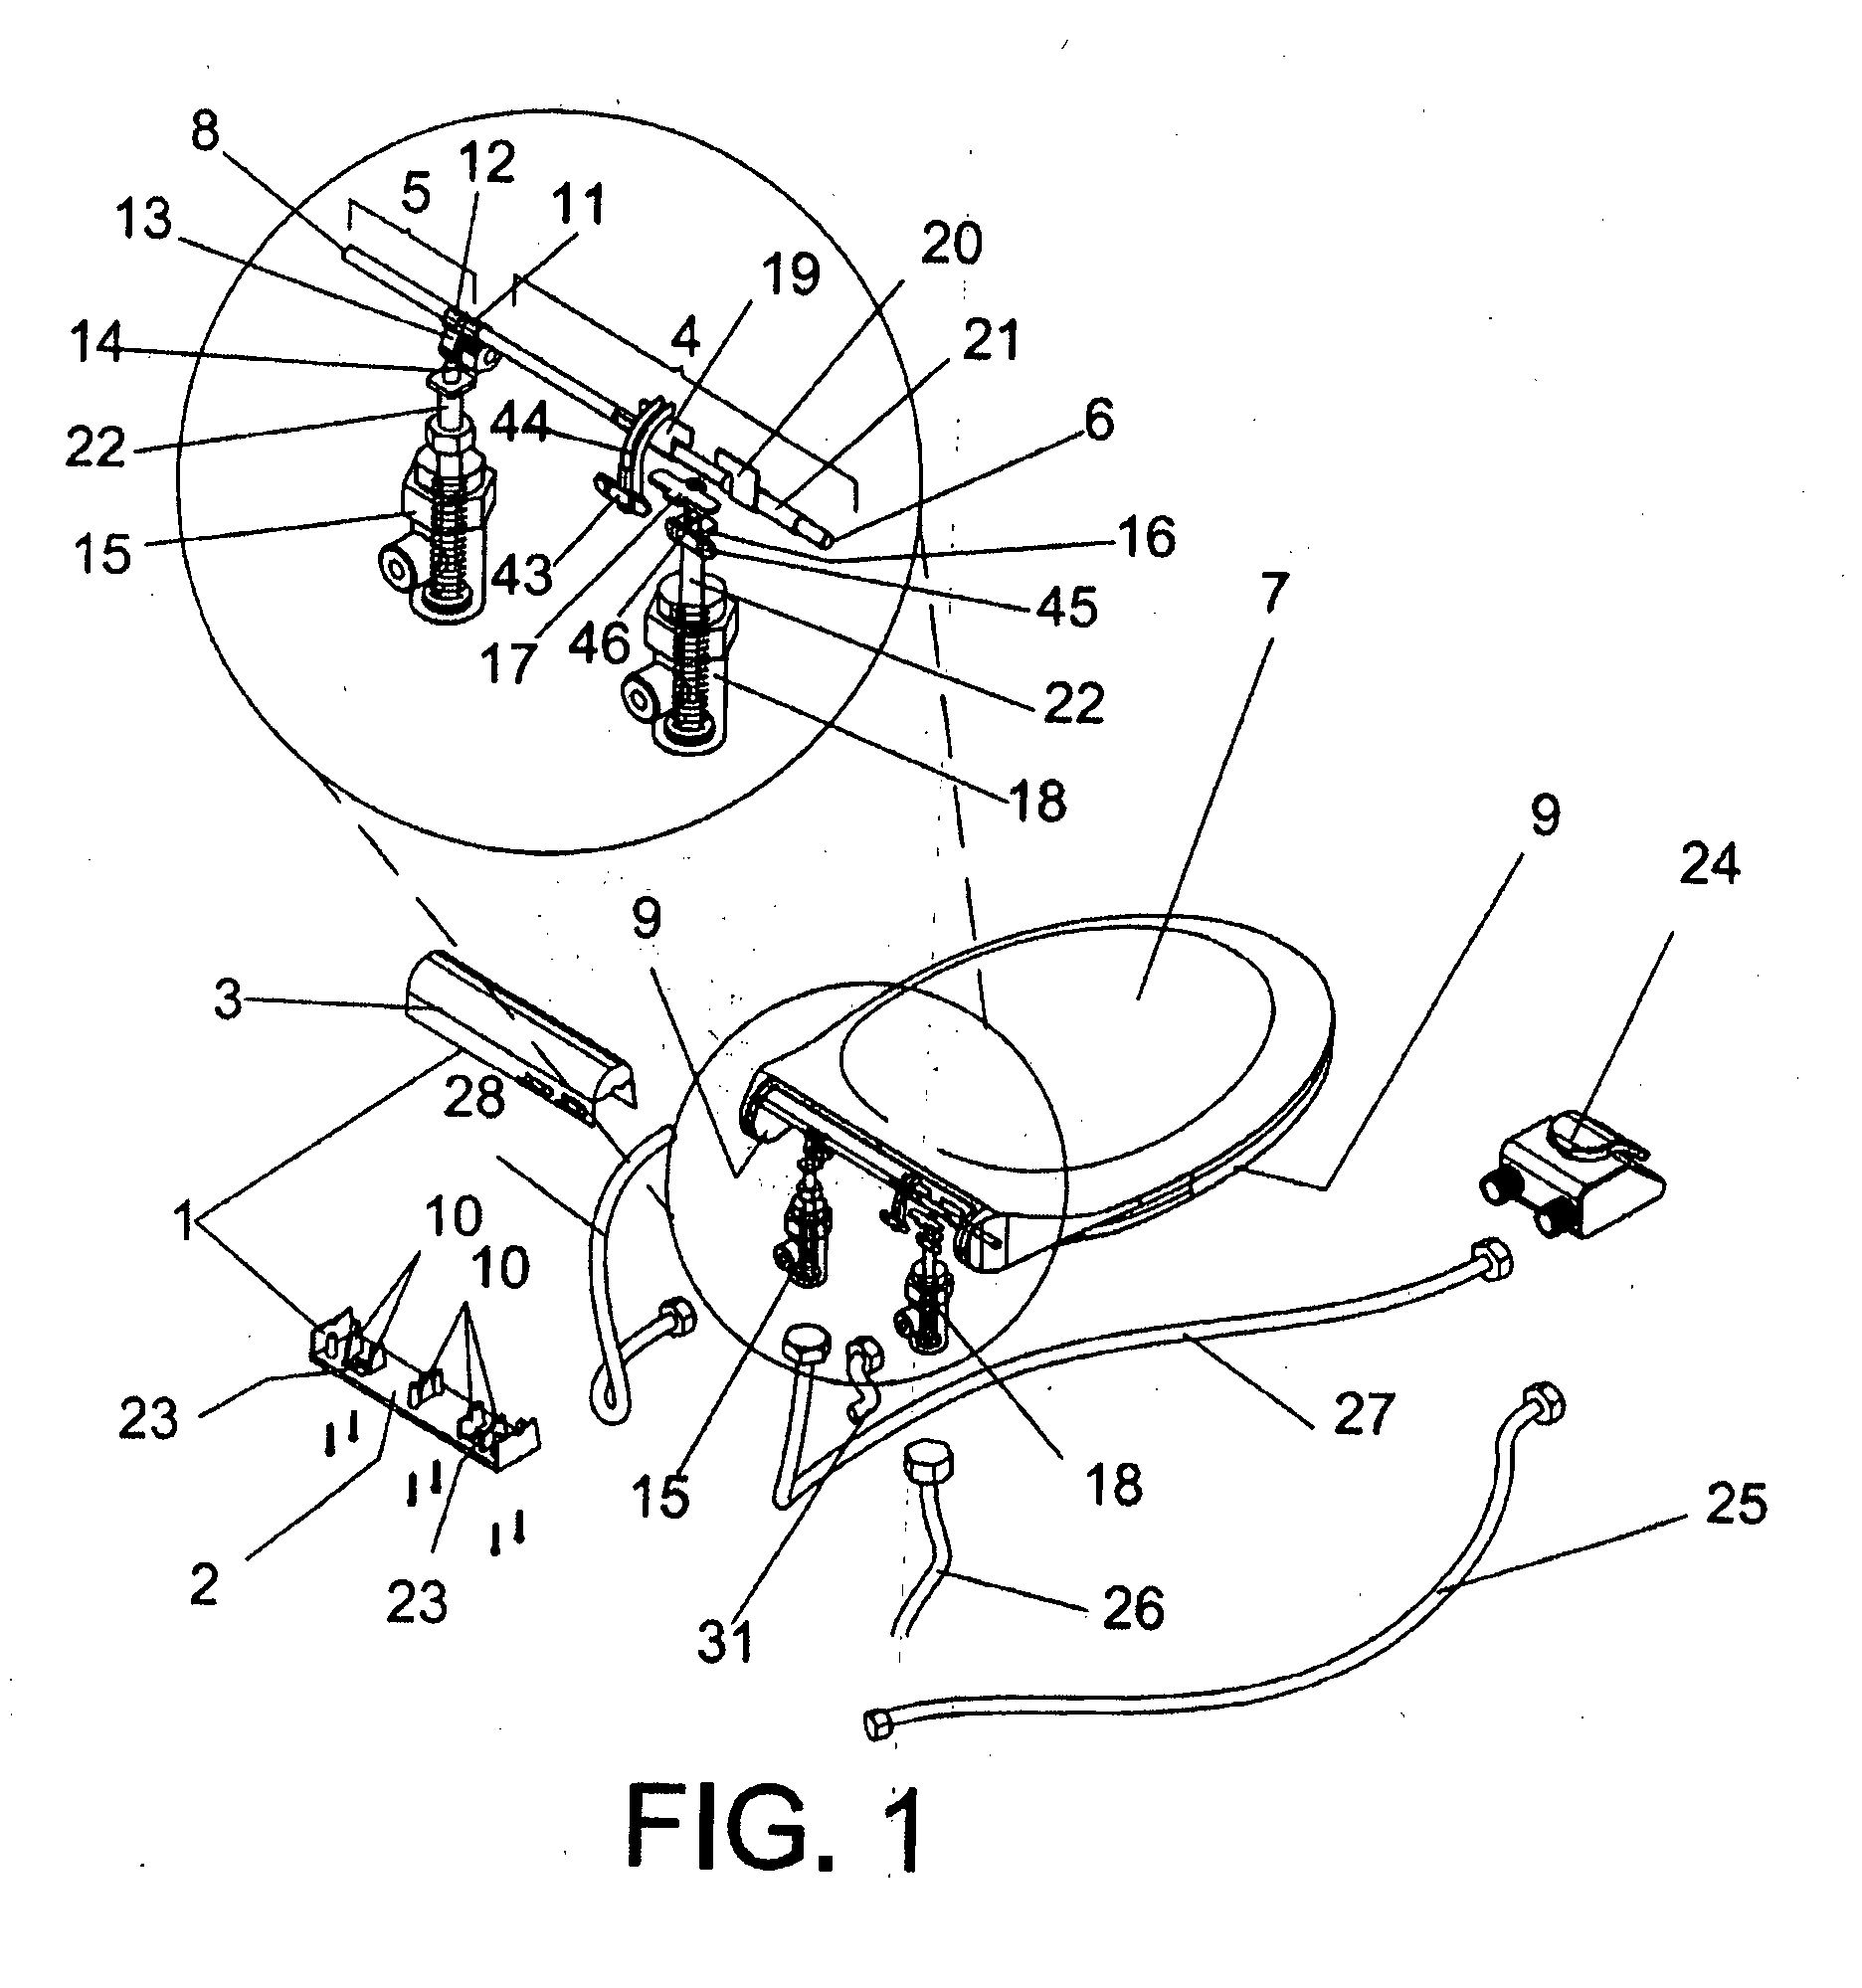 Device comprising actuating mechanisms for lifting and lowering the cover and the seat of a wc, independently from each other or simultaneously